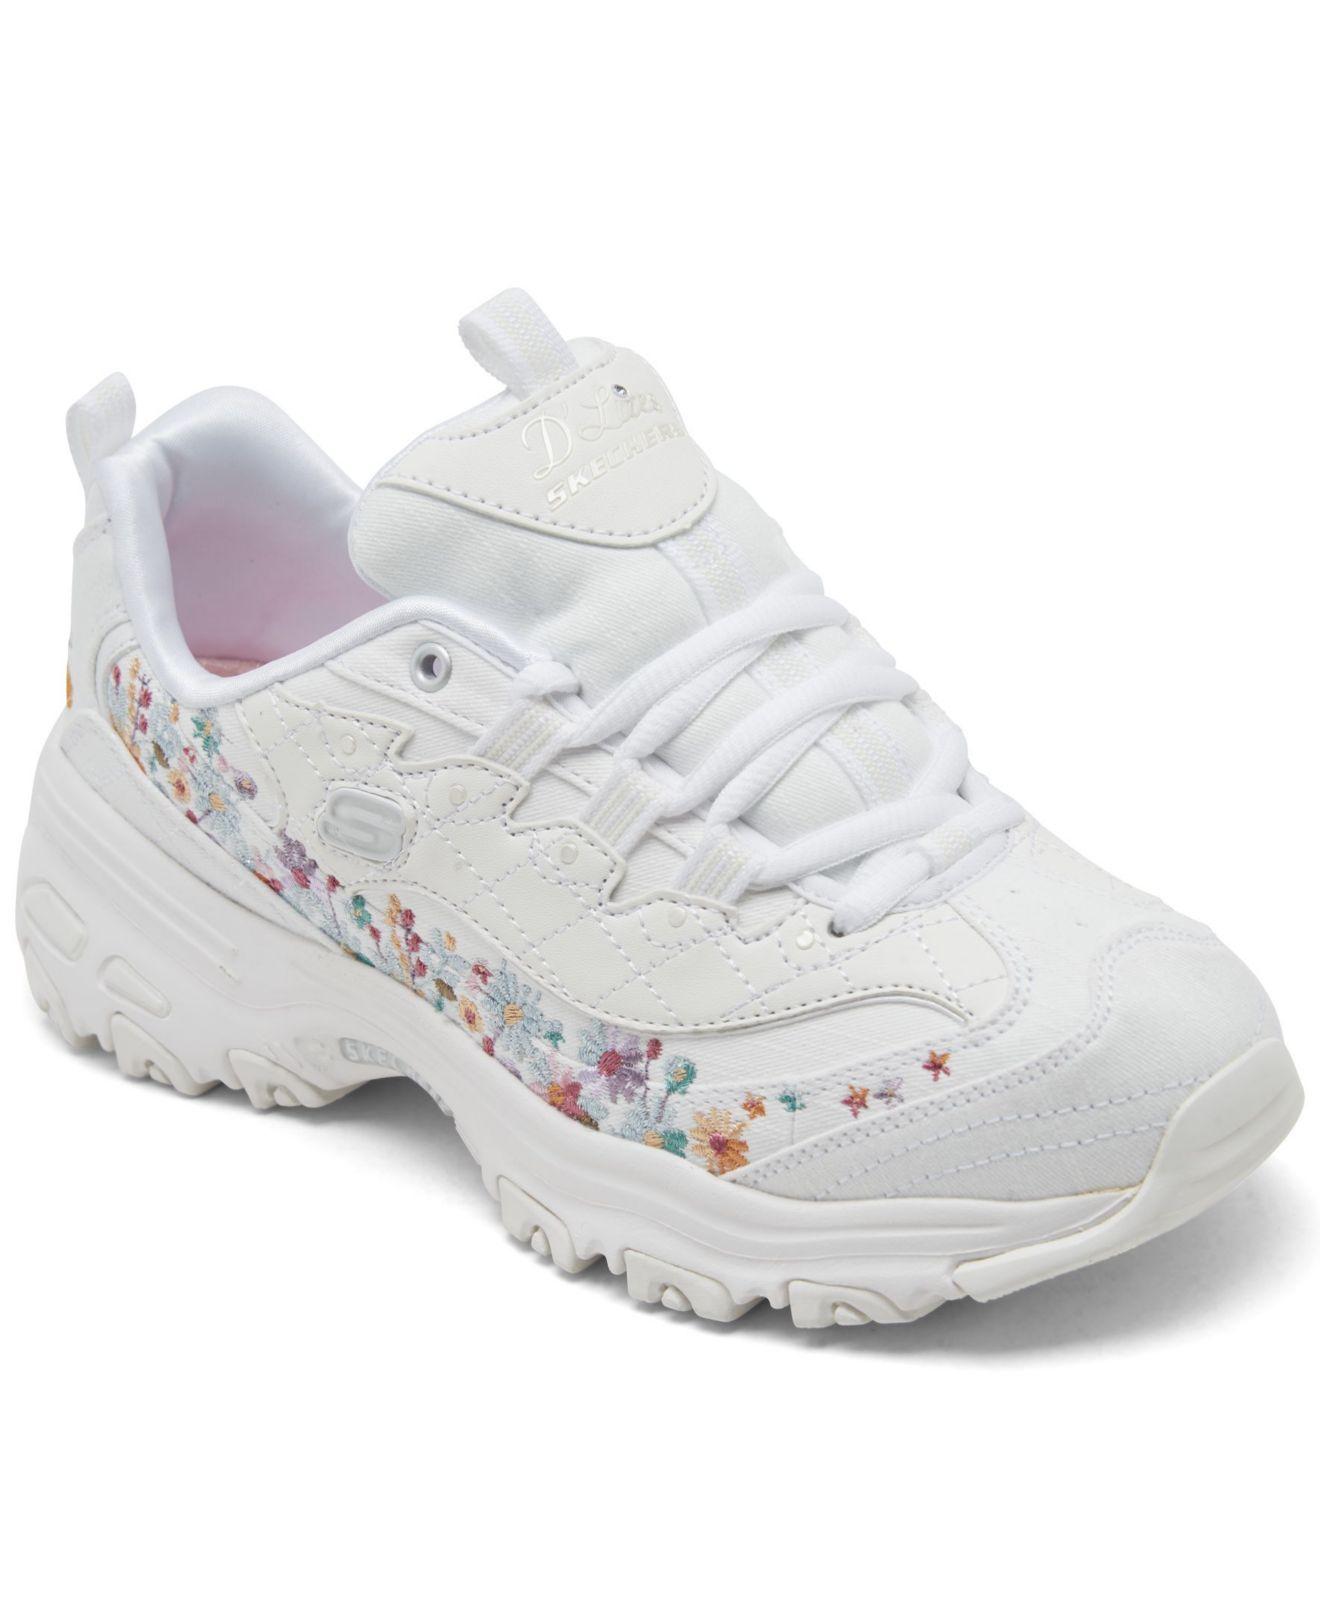 Skechers D'lites Floral Sneakers From Finish Line in White | Lyst